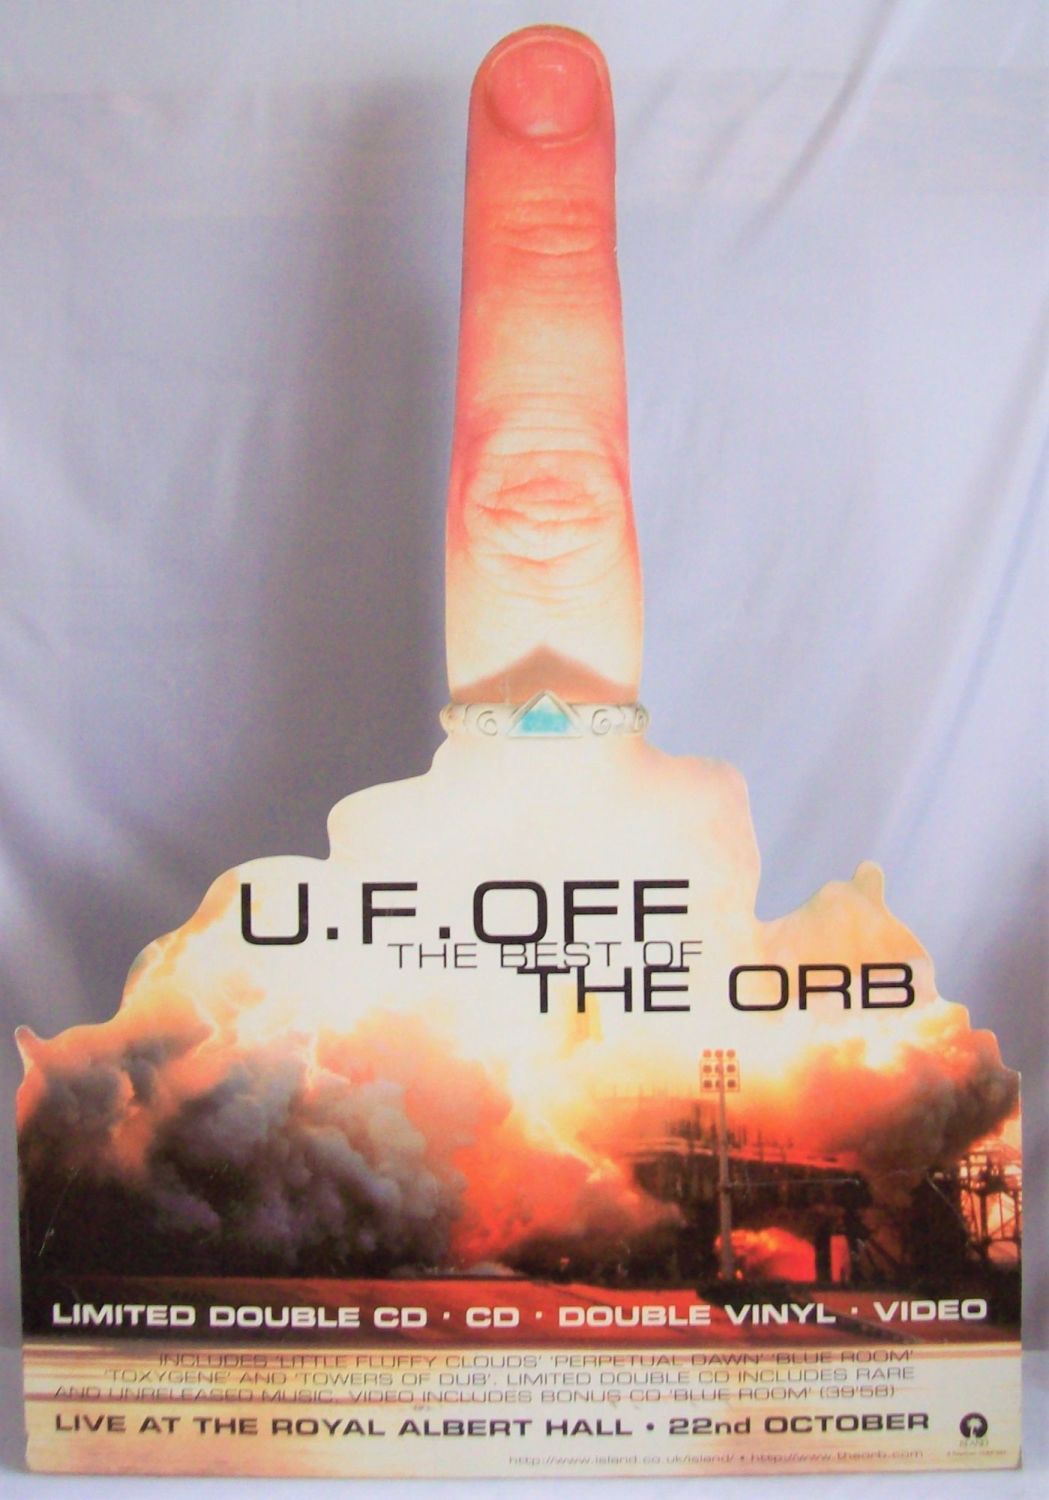 THE ORB U.K. RECORD COMPANY PROMO SHOP DISPLAY STANDEE FOR THE COMPILATION 